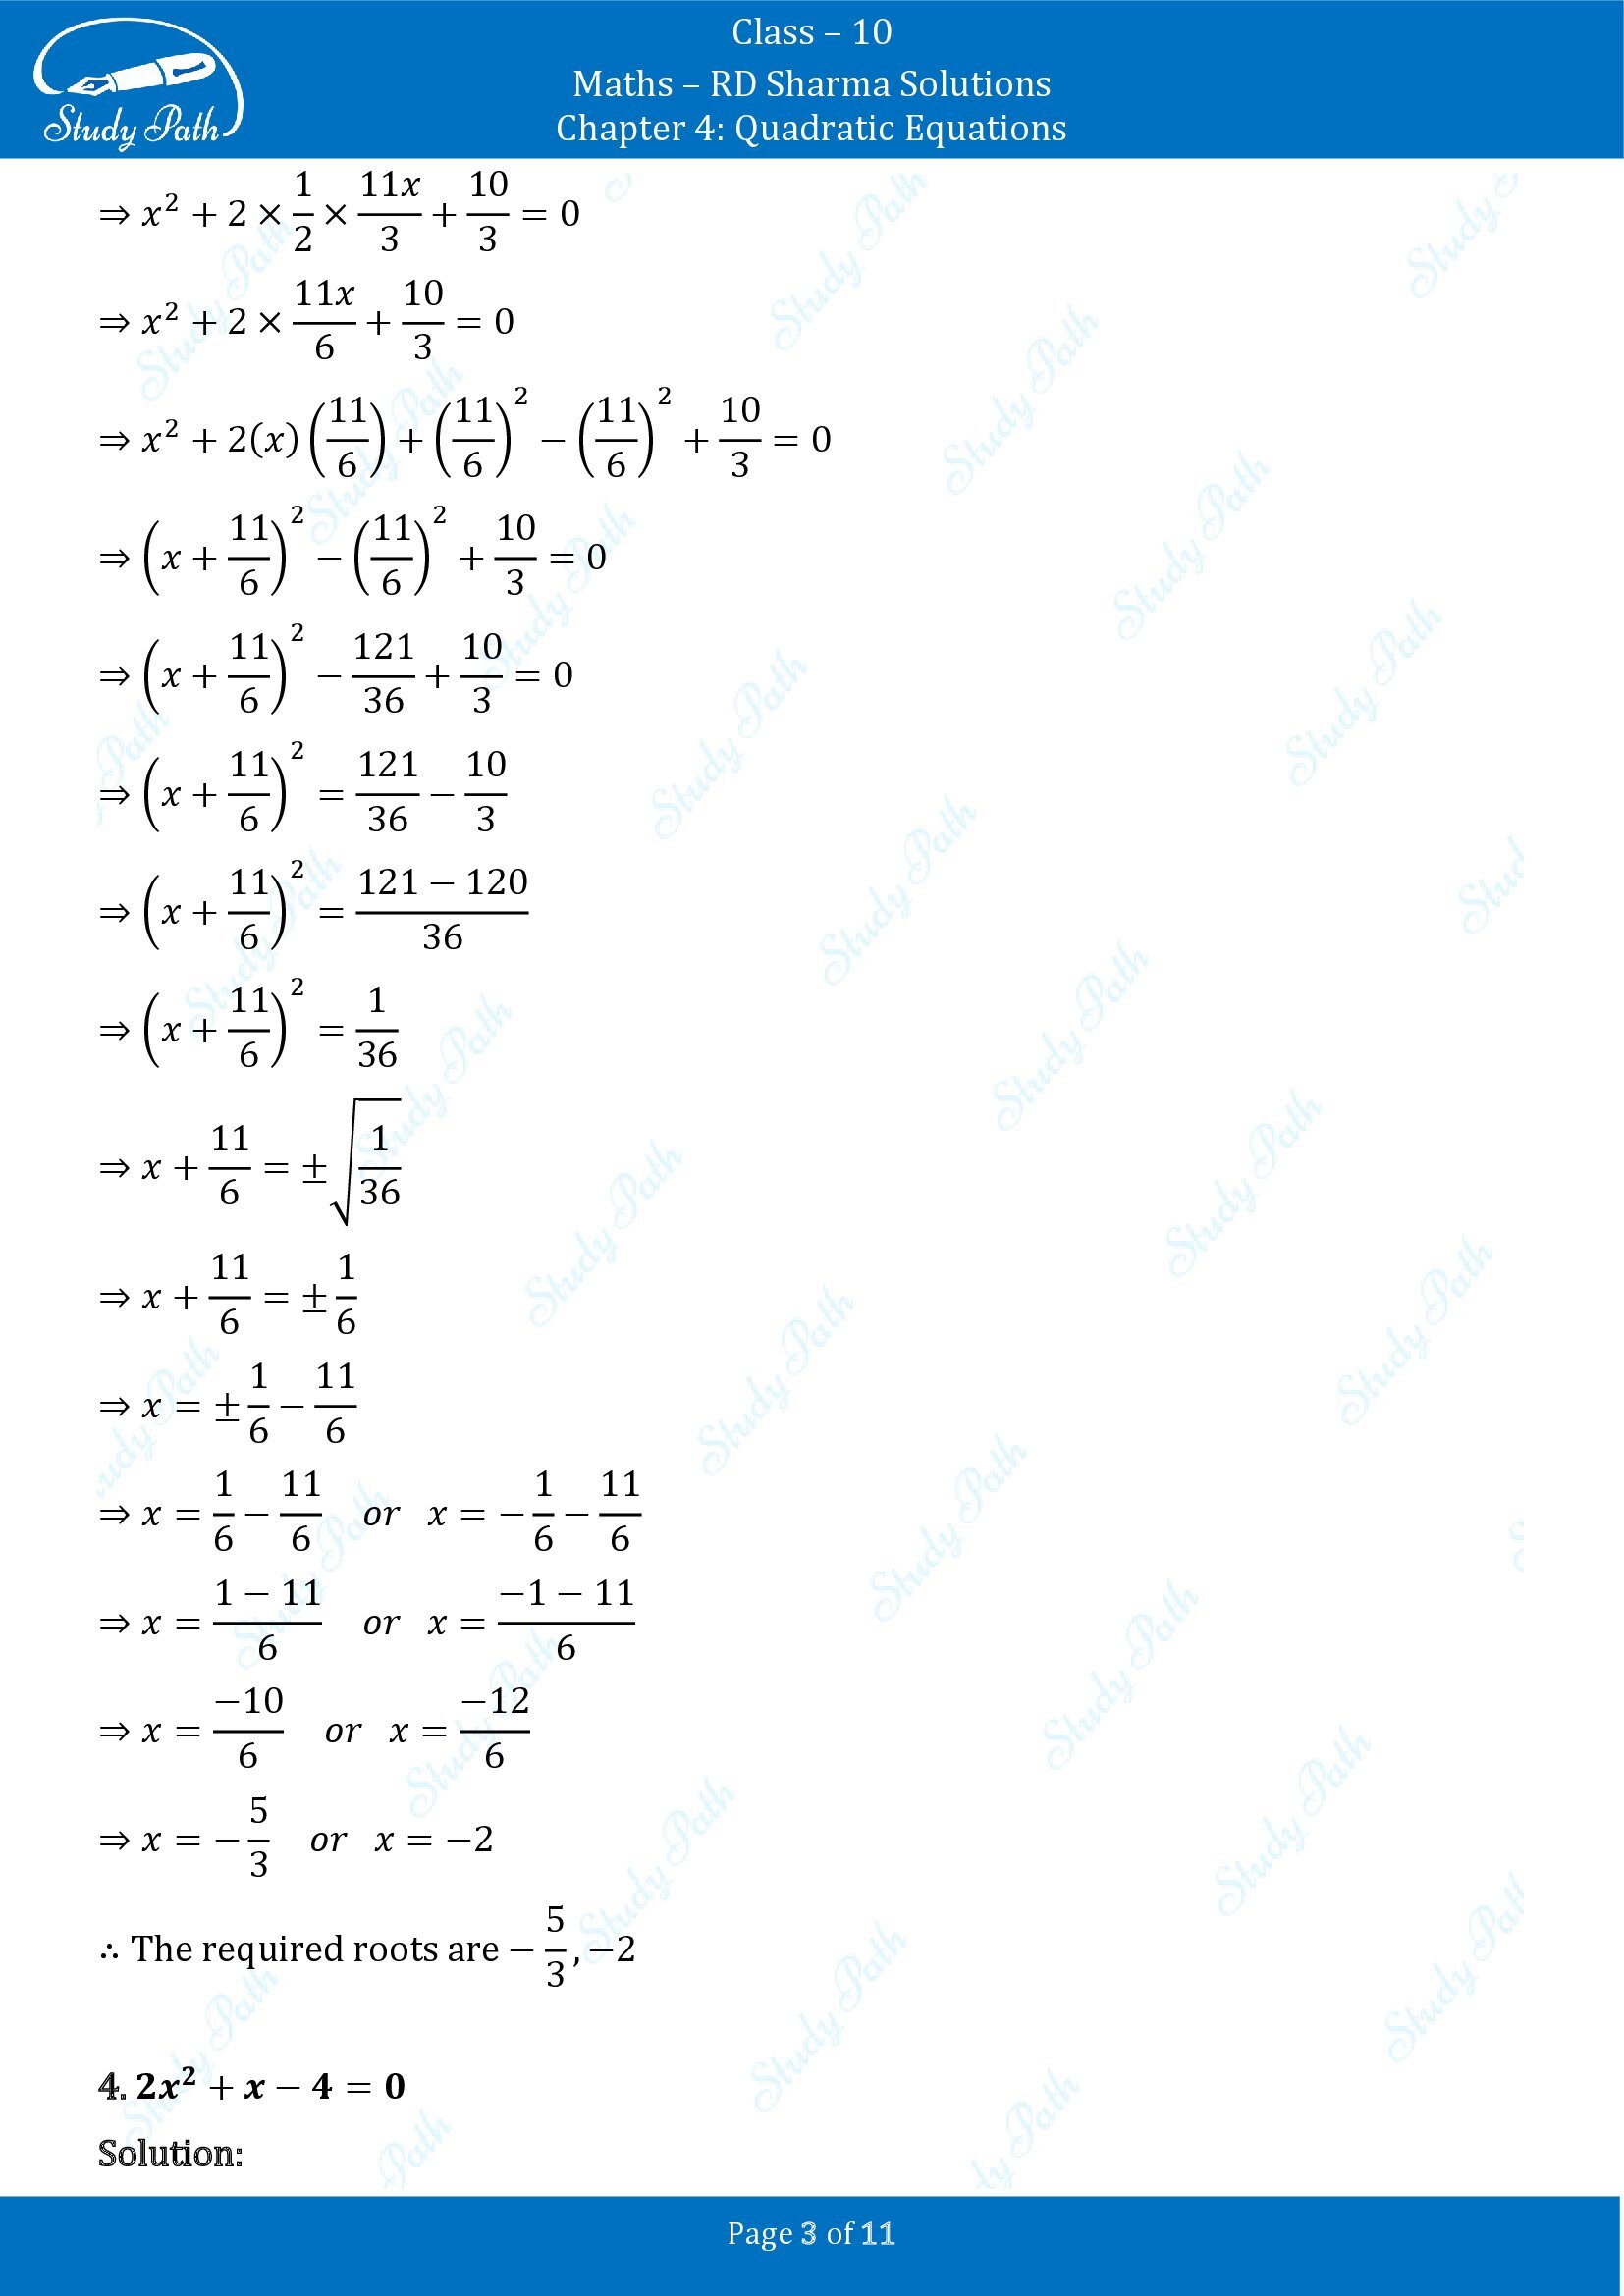 RD Sharma Solutions Class 10 Chapter 4 Quadratic Equations Exercise 4.4 00003